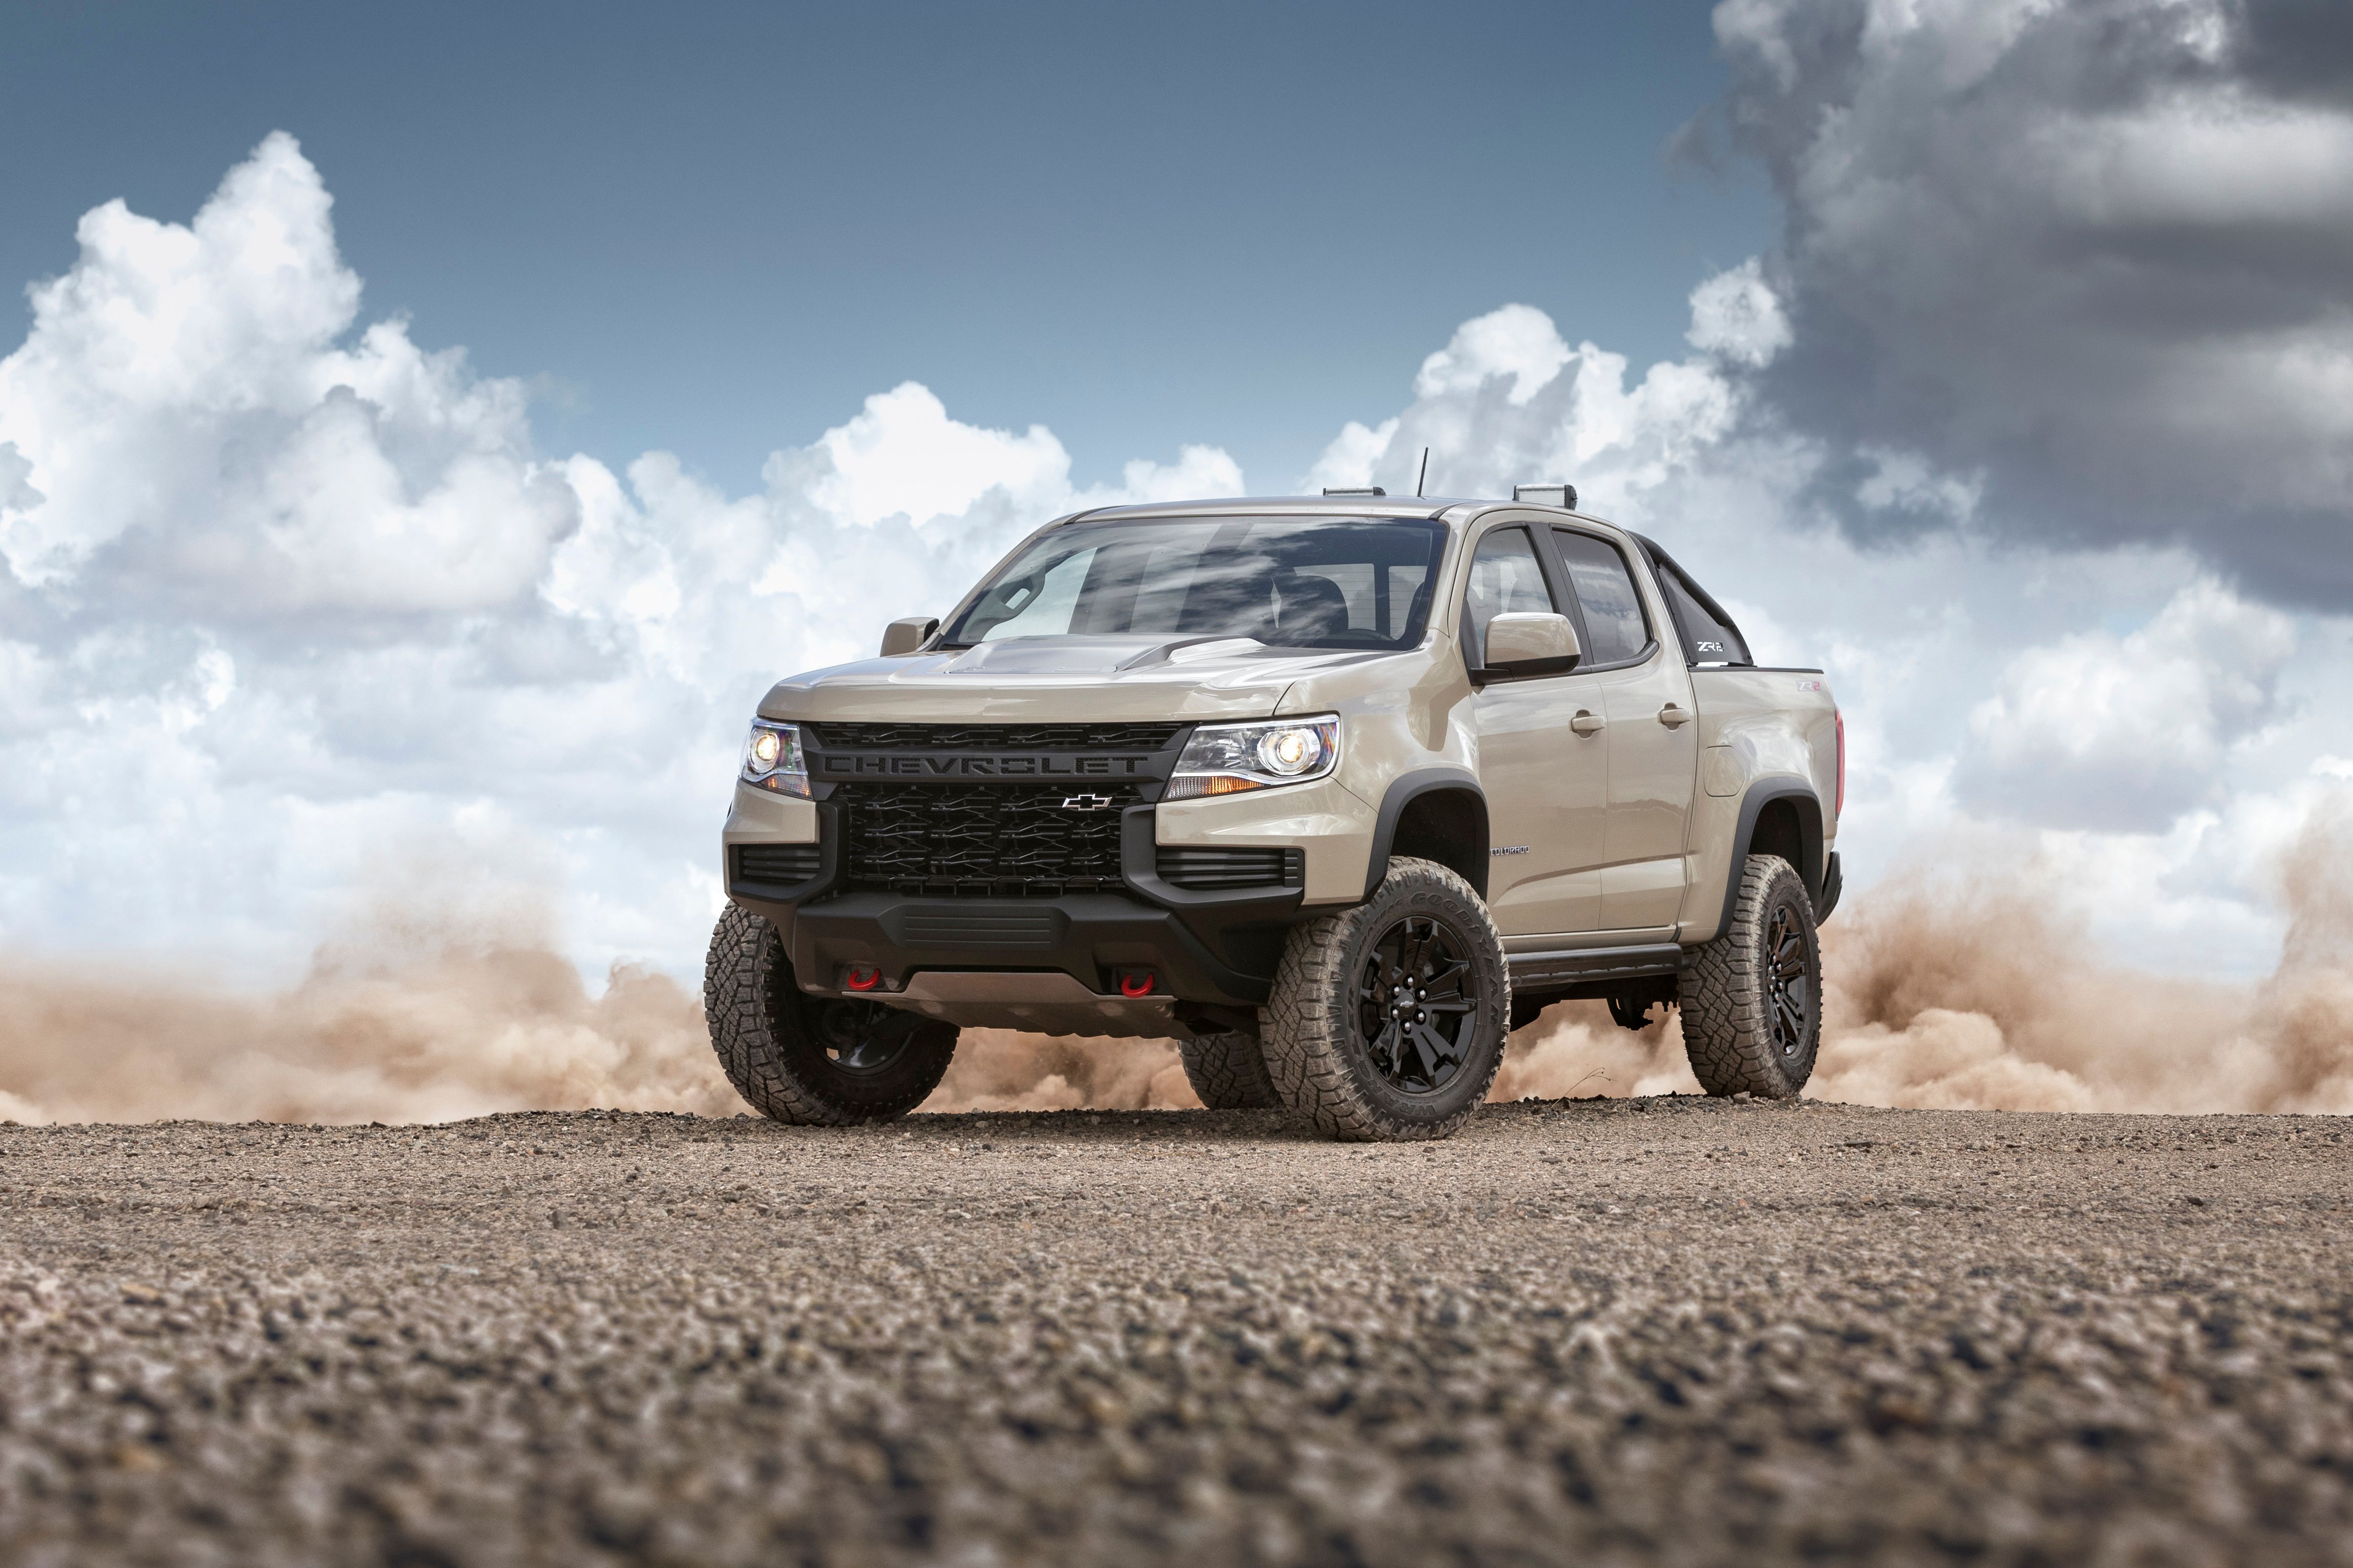 These Are The 9 Smallest Pickup Trucks For Sale In The US Today